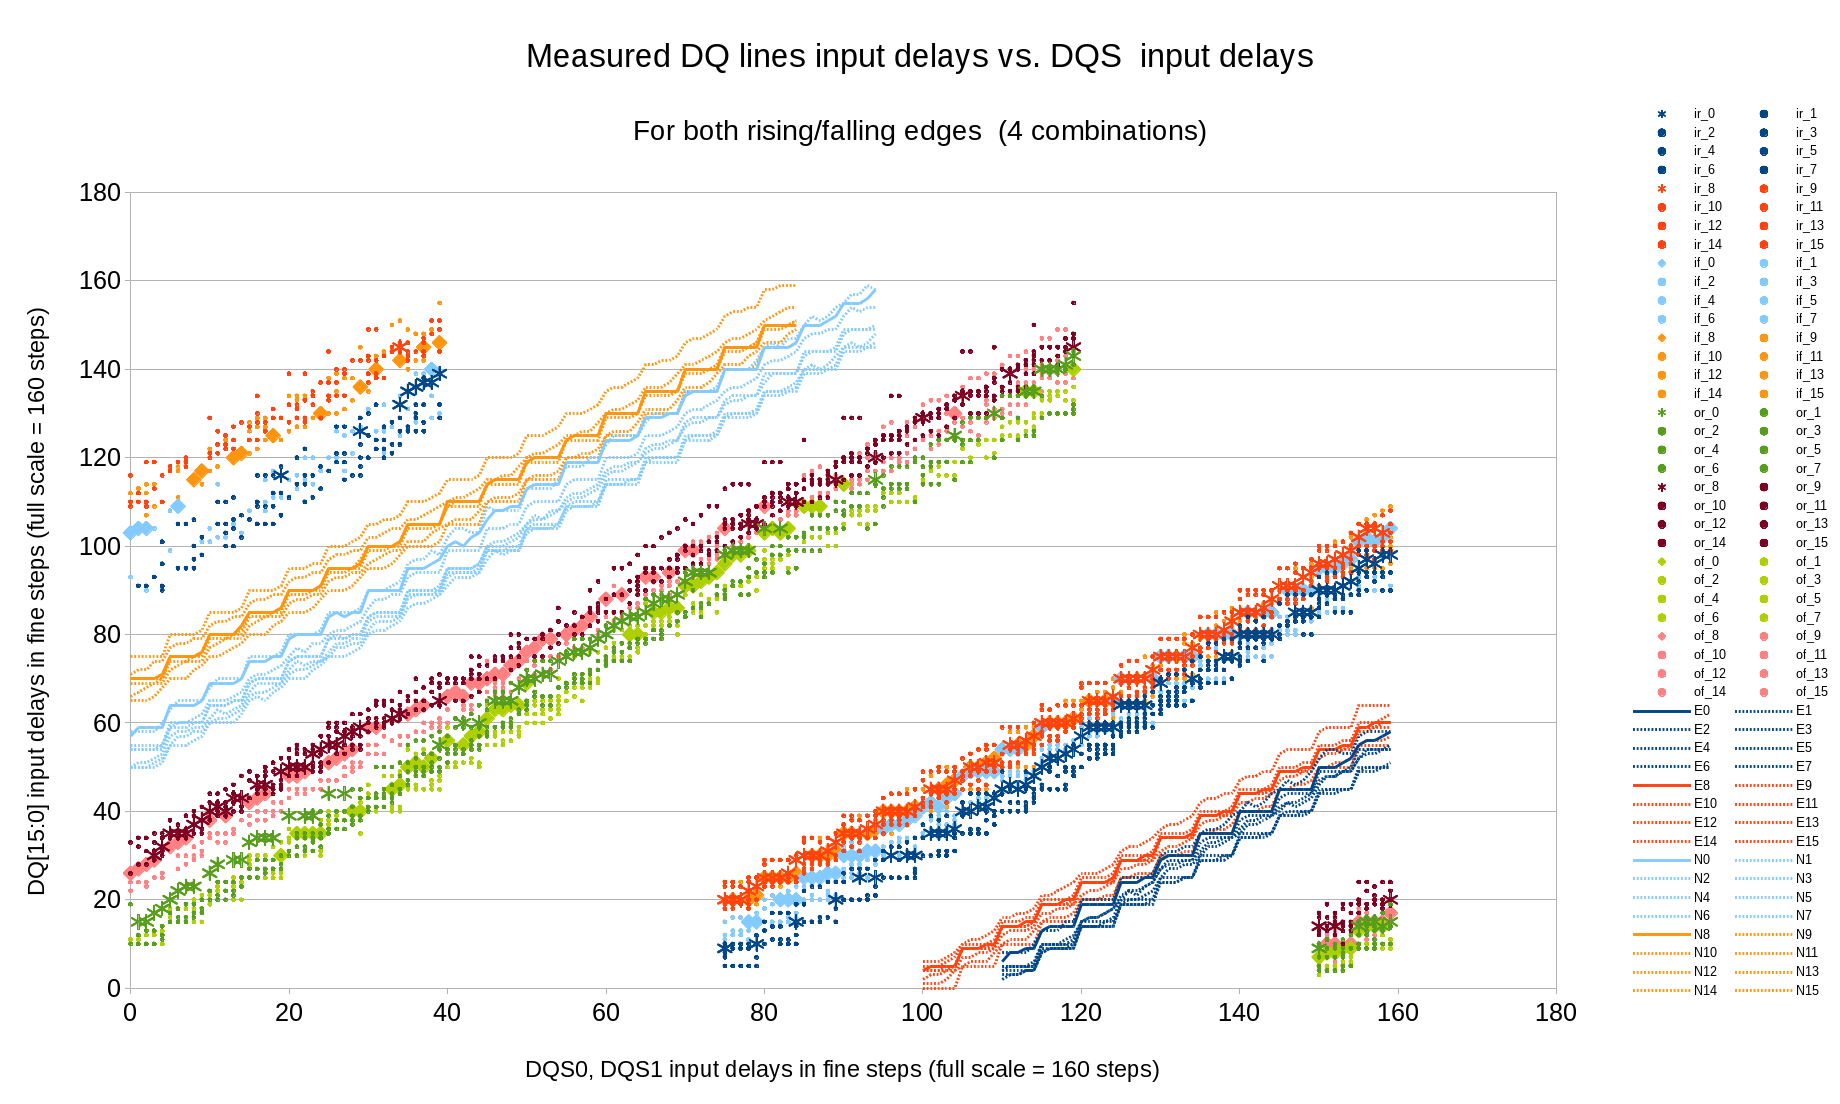 Fig.6 Measured (marginal) and calculated (optimal) DQ input delays vs. DQS input delays